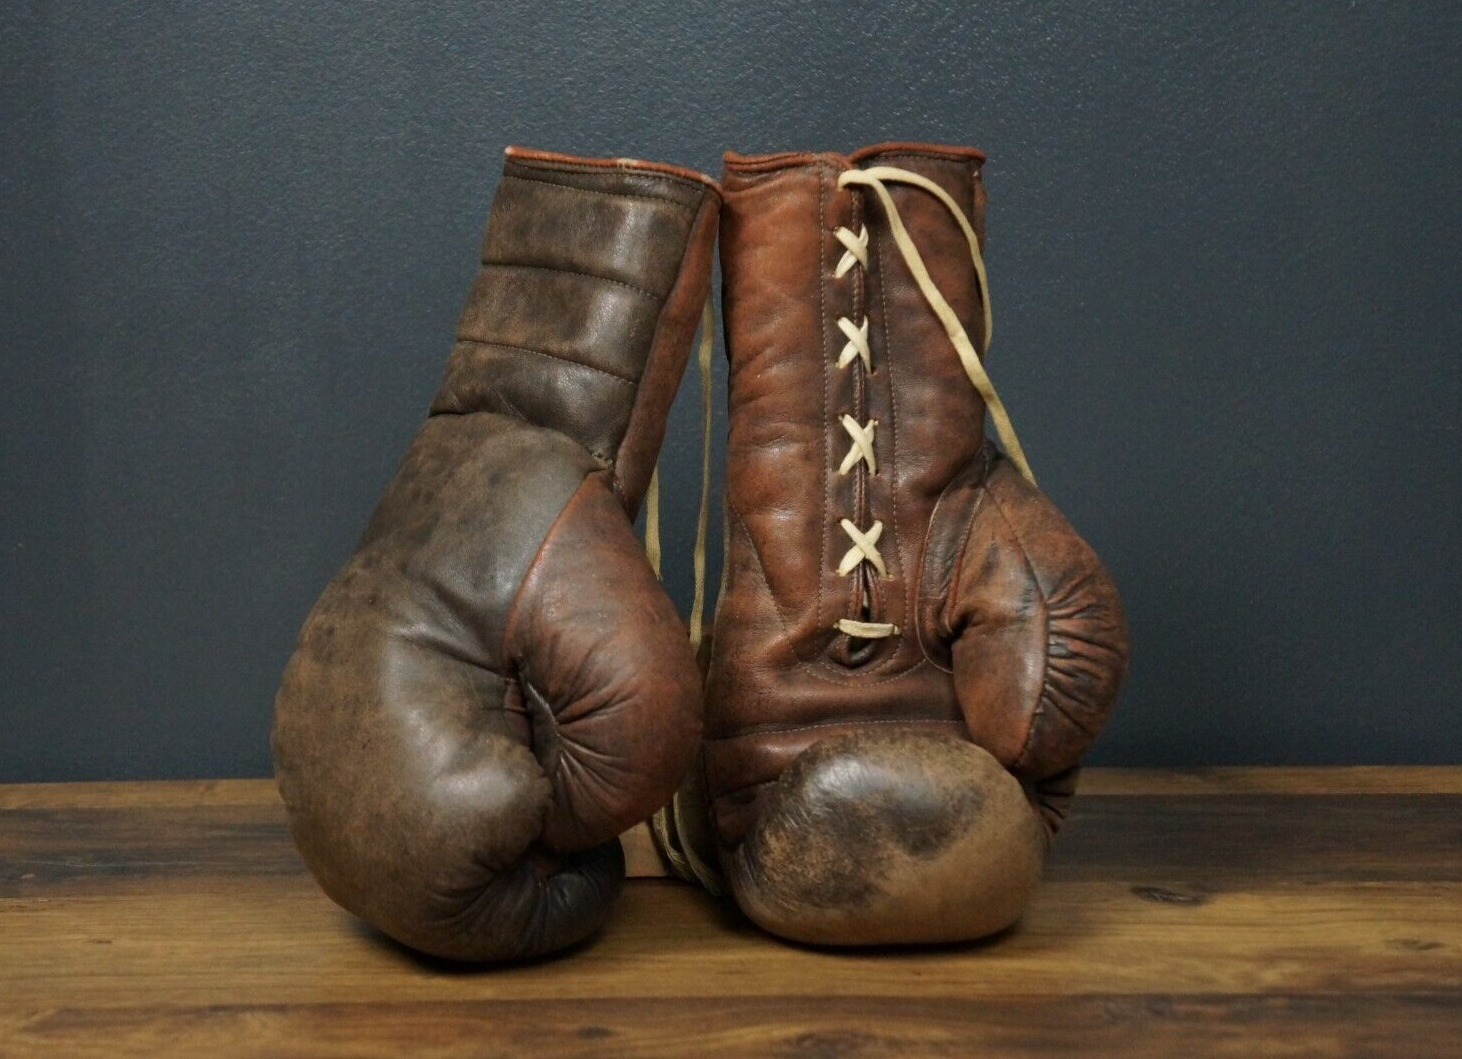 Boxing gloves, vintage boxing, gift for boxer, sports collecting, boxing, sport